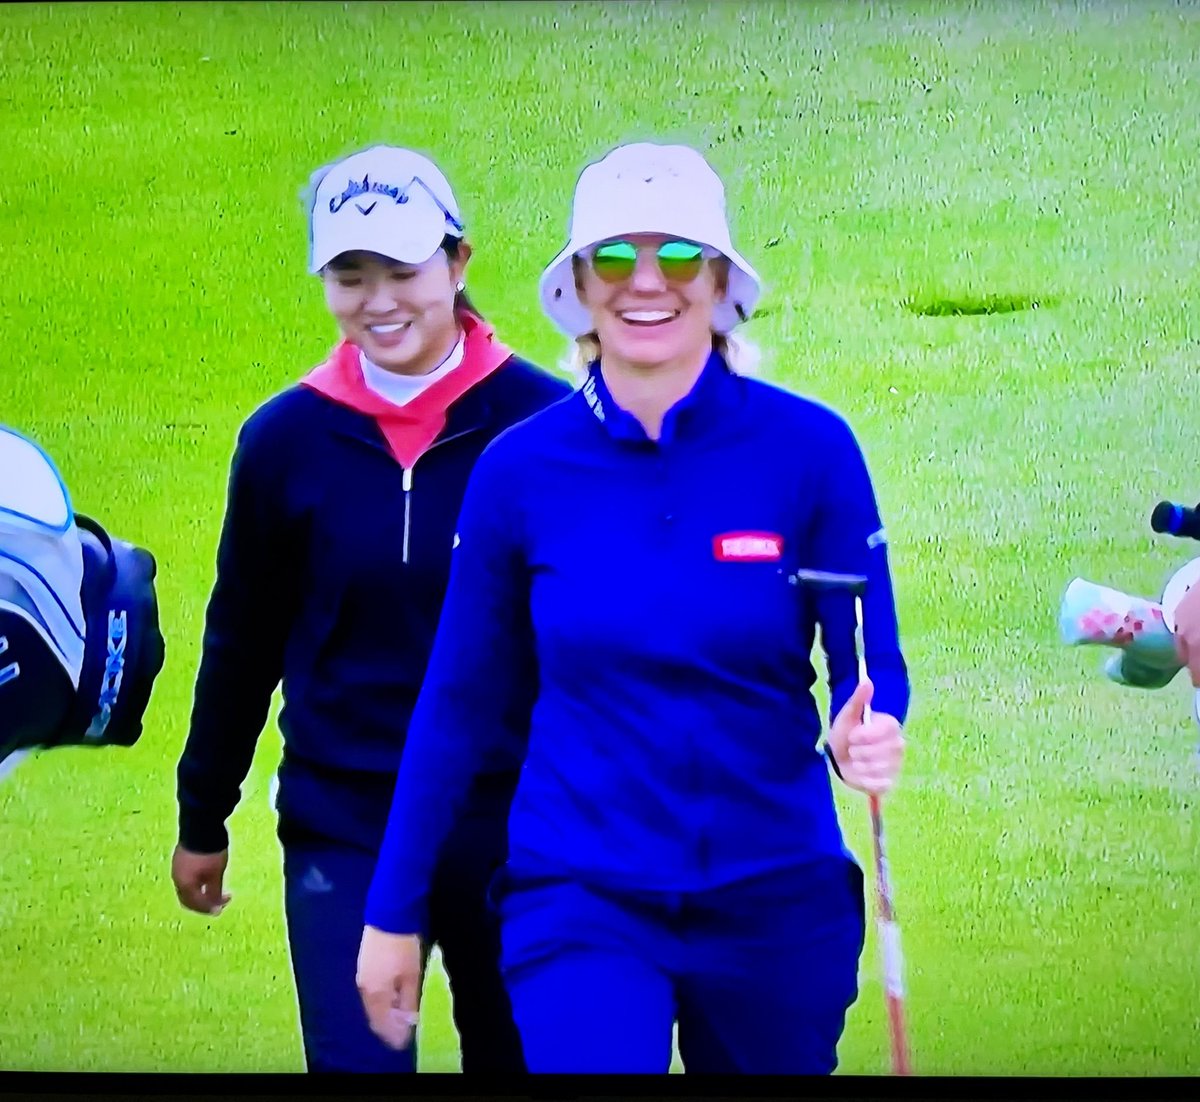 Congrats Rose. Incredible finish. Plenty of reasons to smile this week, @msagstrom! Amazing playing! You were a class act as always. @ANNIKA59 and I are proud of you!! @LPGA @LPGAfounders